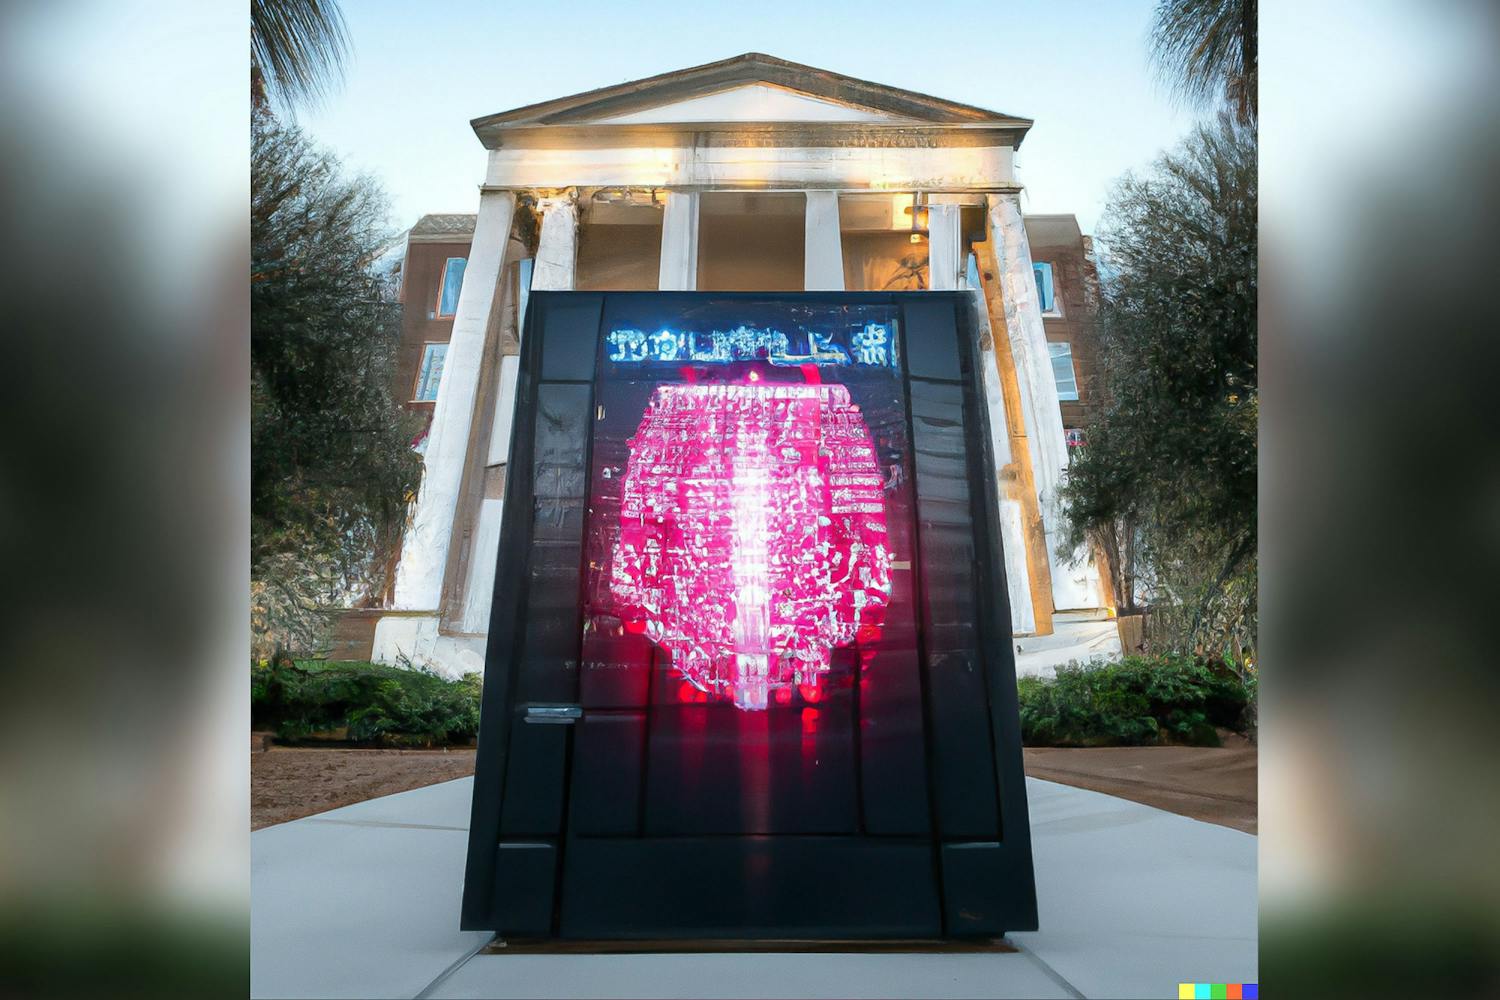 This visual was generated on Jan. 25 by OpenAI's software, DALL-E 2, when given the prompt "An AI supercomputer taking over a university." OpenAI also produced ChatGPT, an AI chatbot that is already changing the way educators teach.